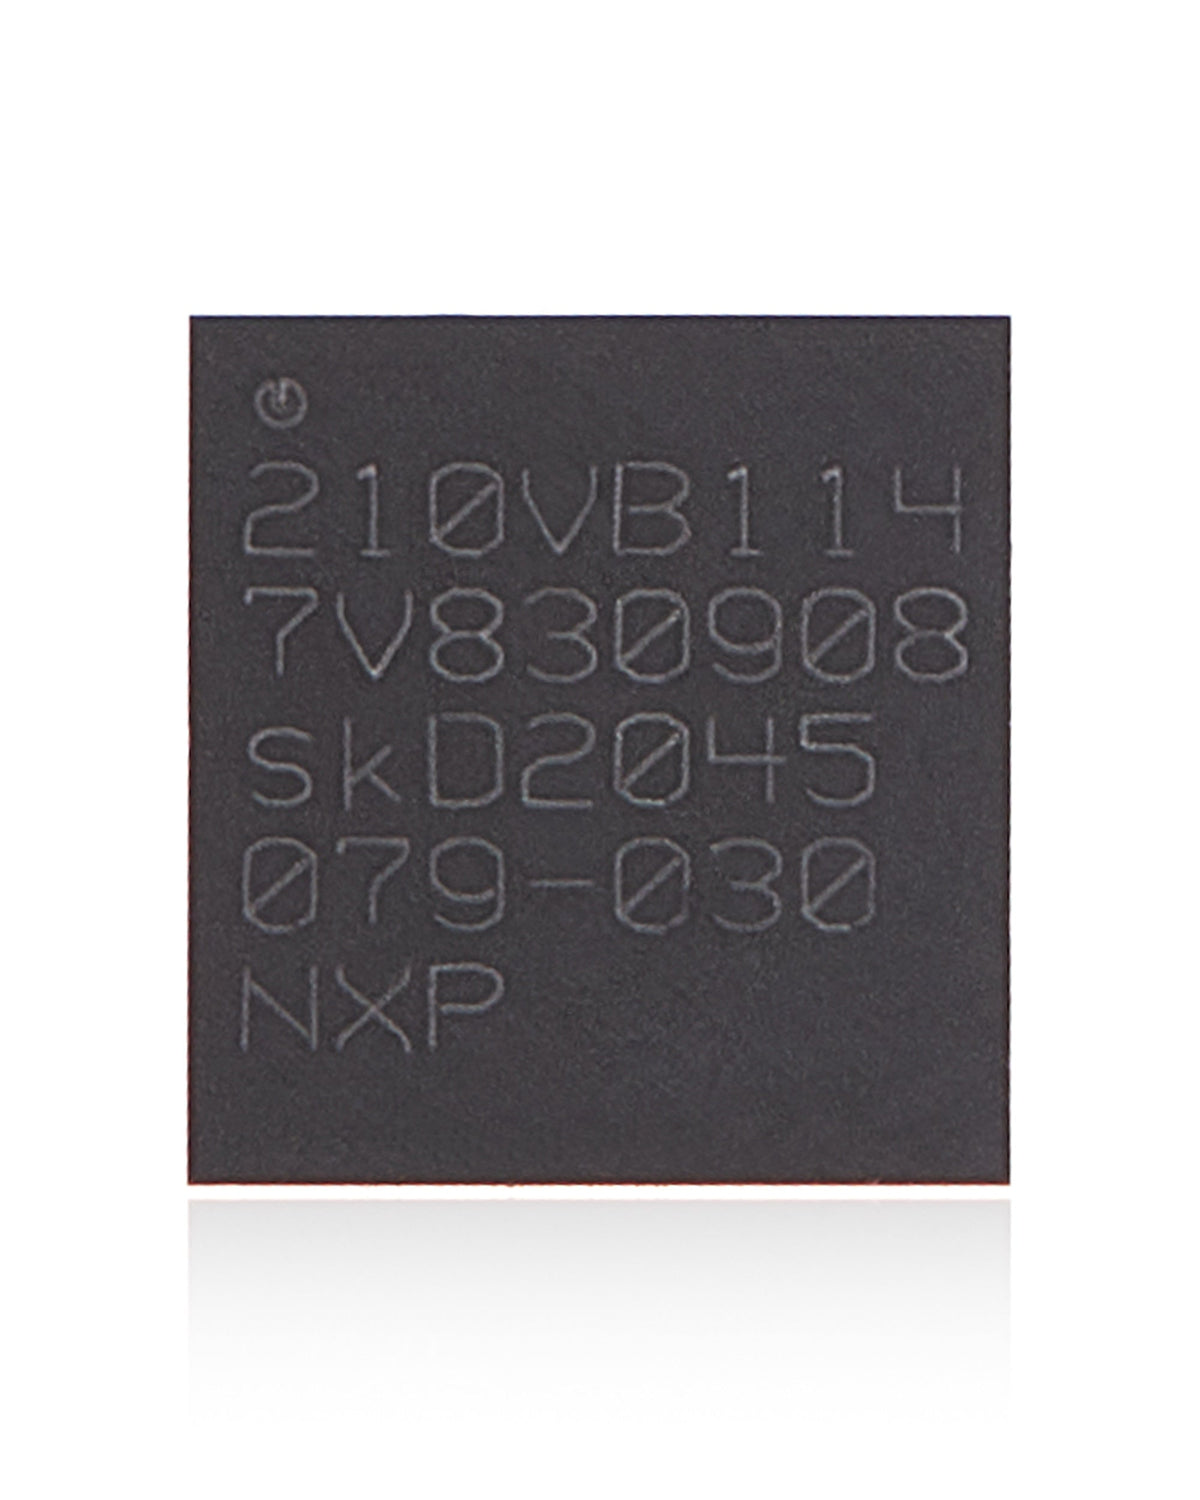 NFC CONTROLLER IC COMPATIBLE WITH IPHONE 12 / 12 PRO / 12 PRO MAX (210VB114)